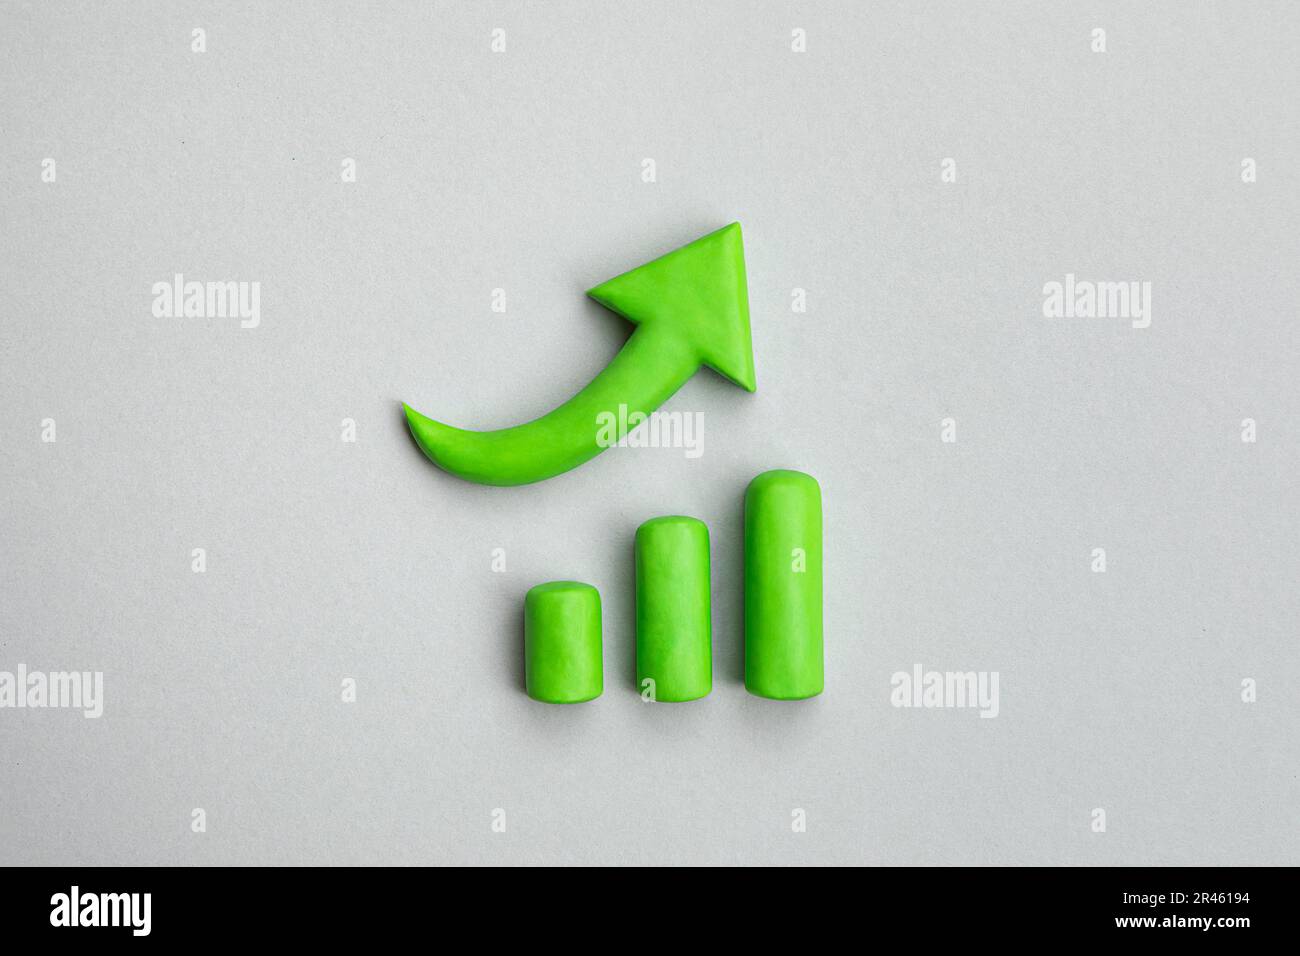 Business growth concept, 3d green arrow pointing up and chart indicating development. Three dimensional simple signs. Financial prosperity, business p Stock Photo